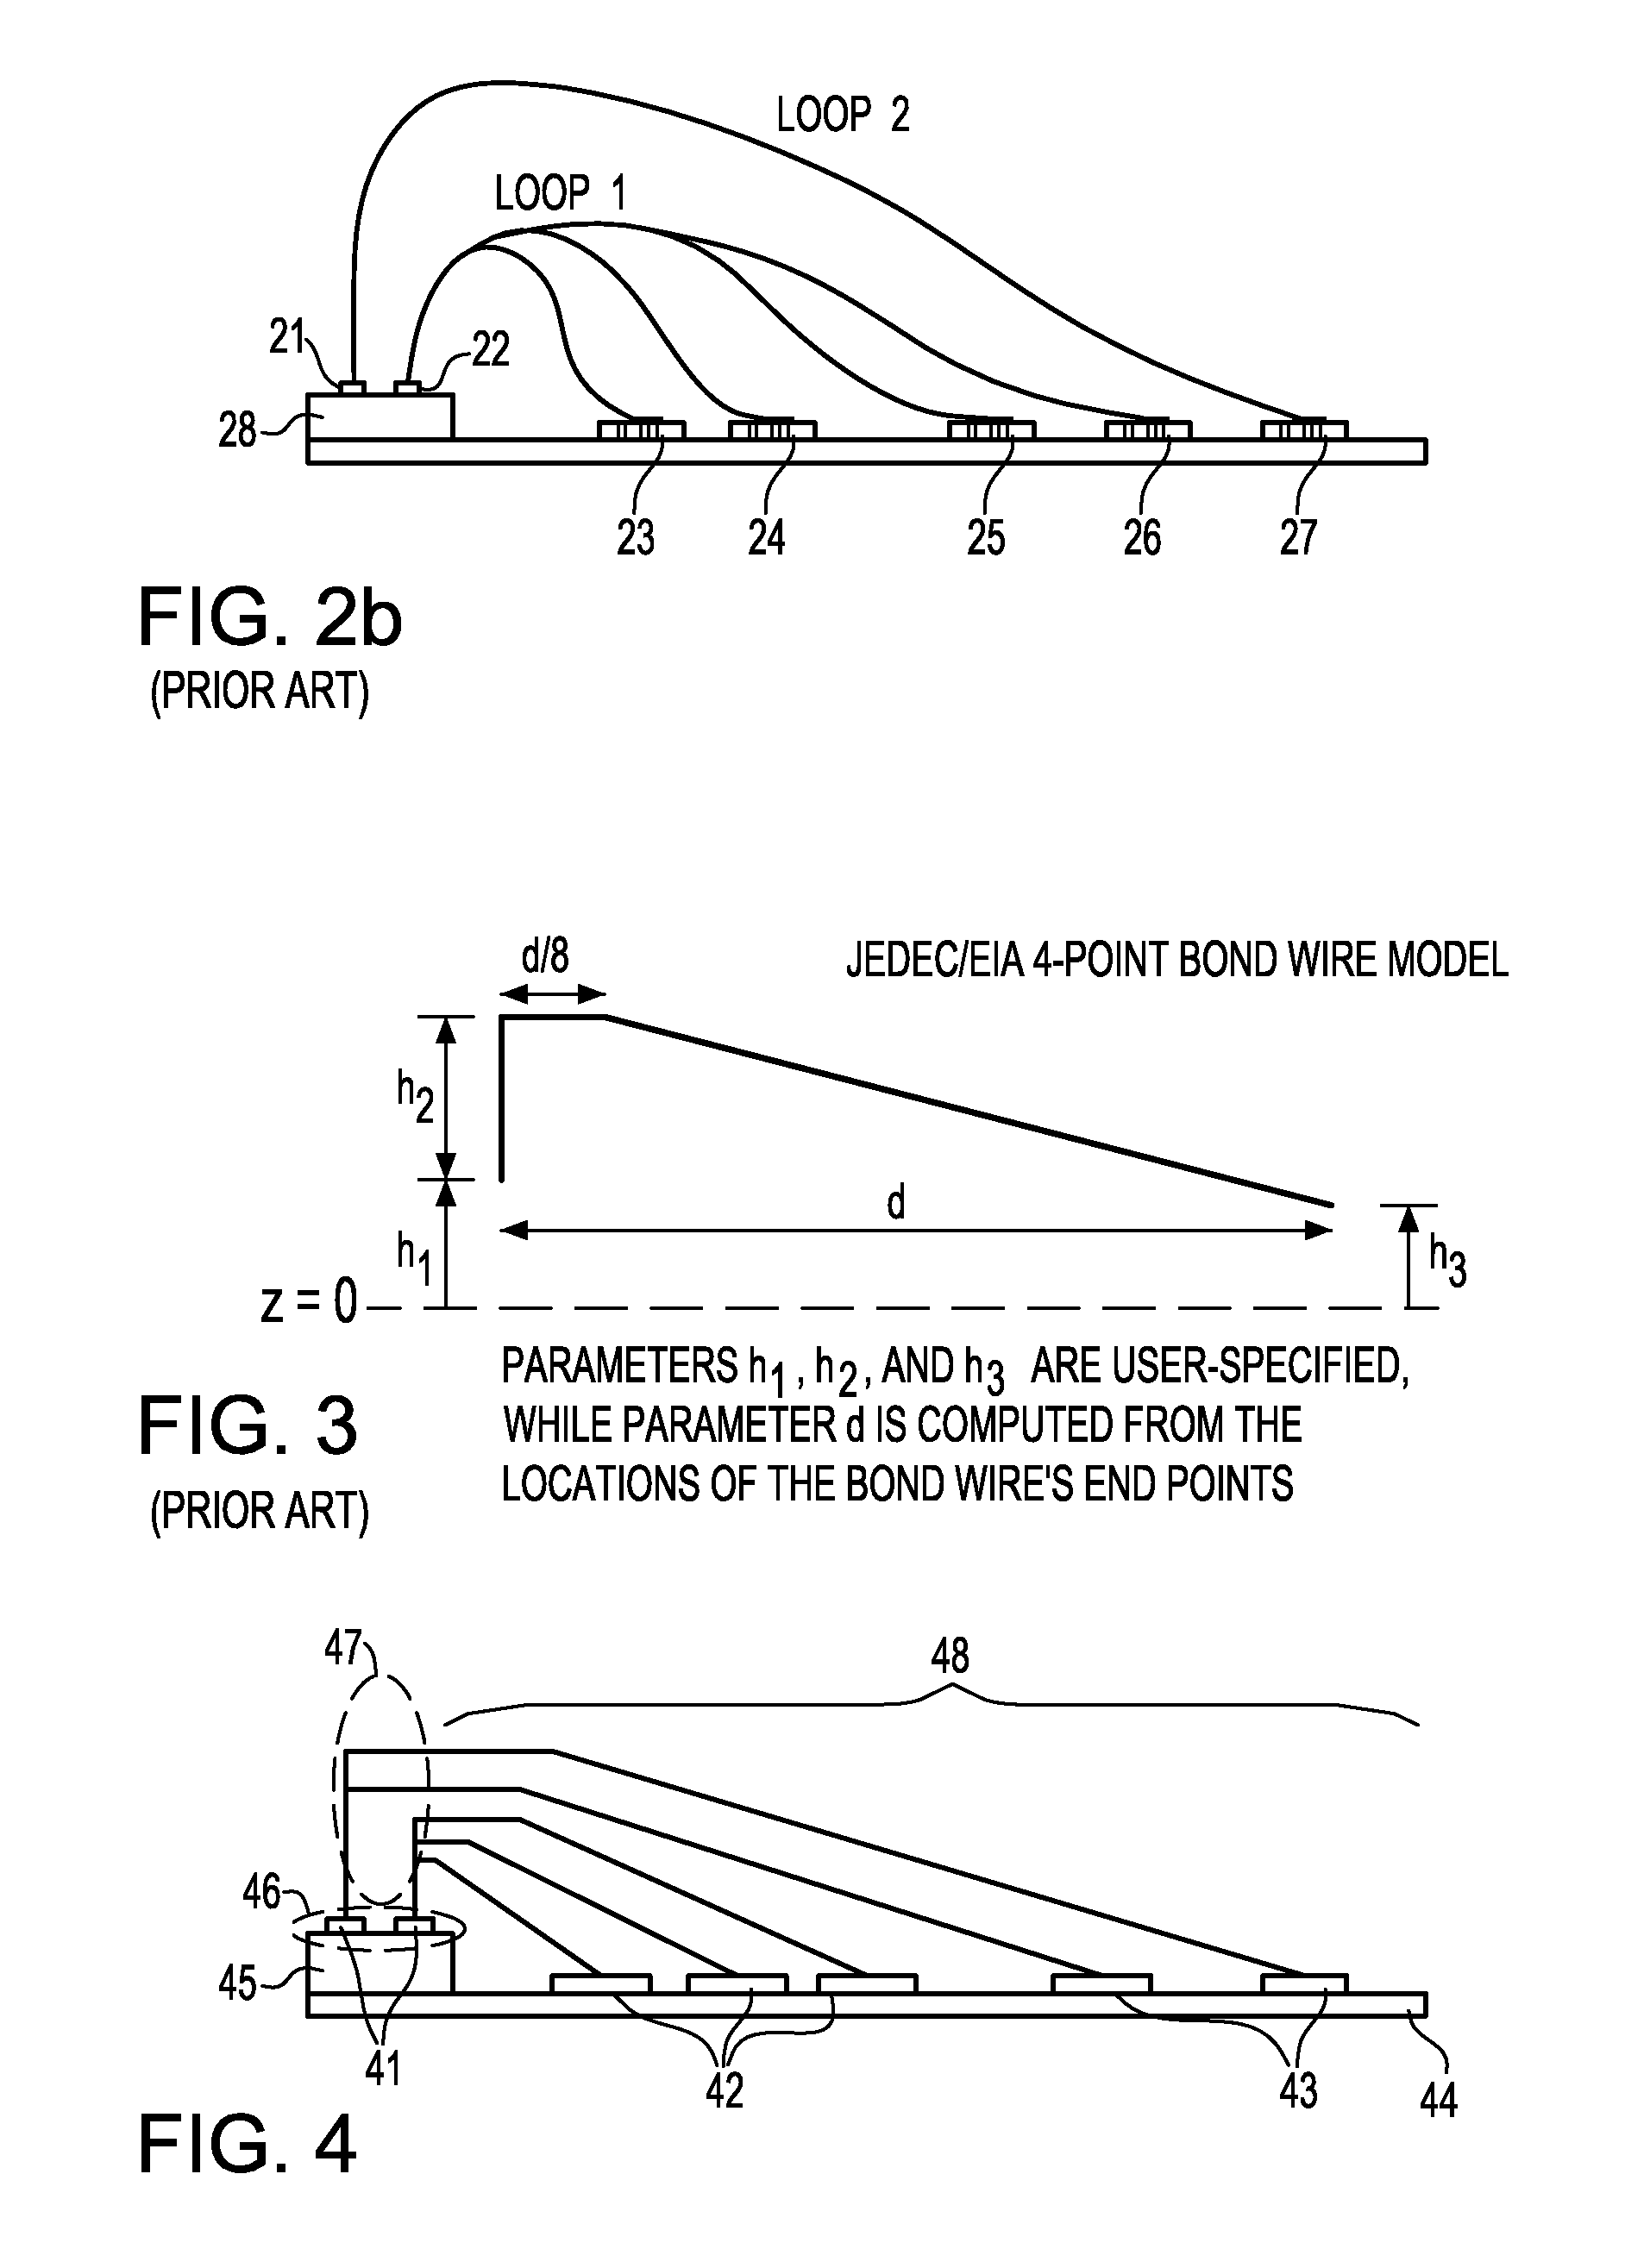 Method of Multi-segments Modeling Bond Wire Interconnects with 2D Simulations in High Speed, High Density Wire Bond Packages